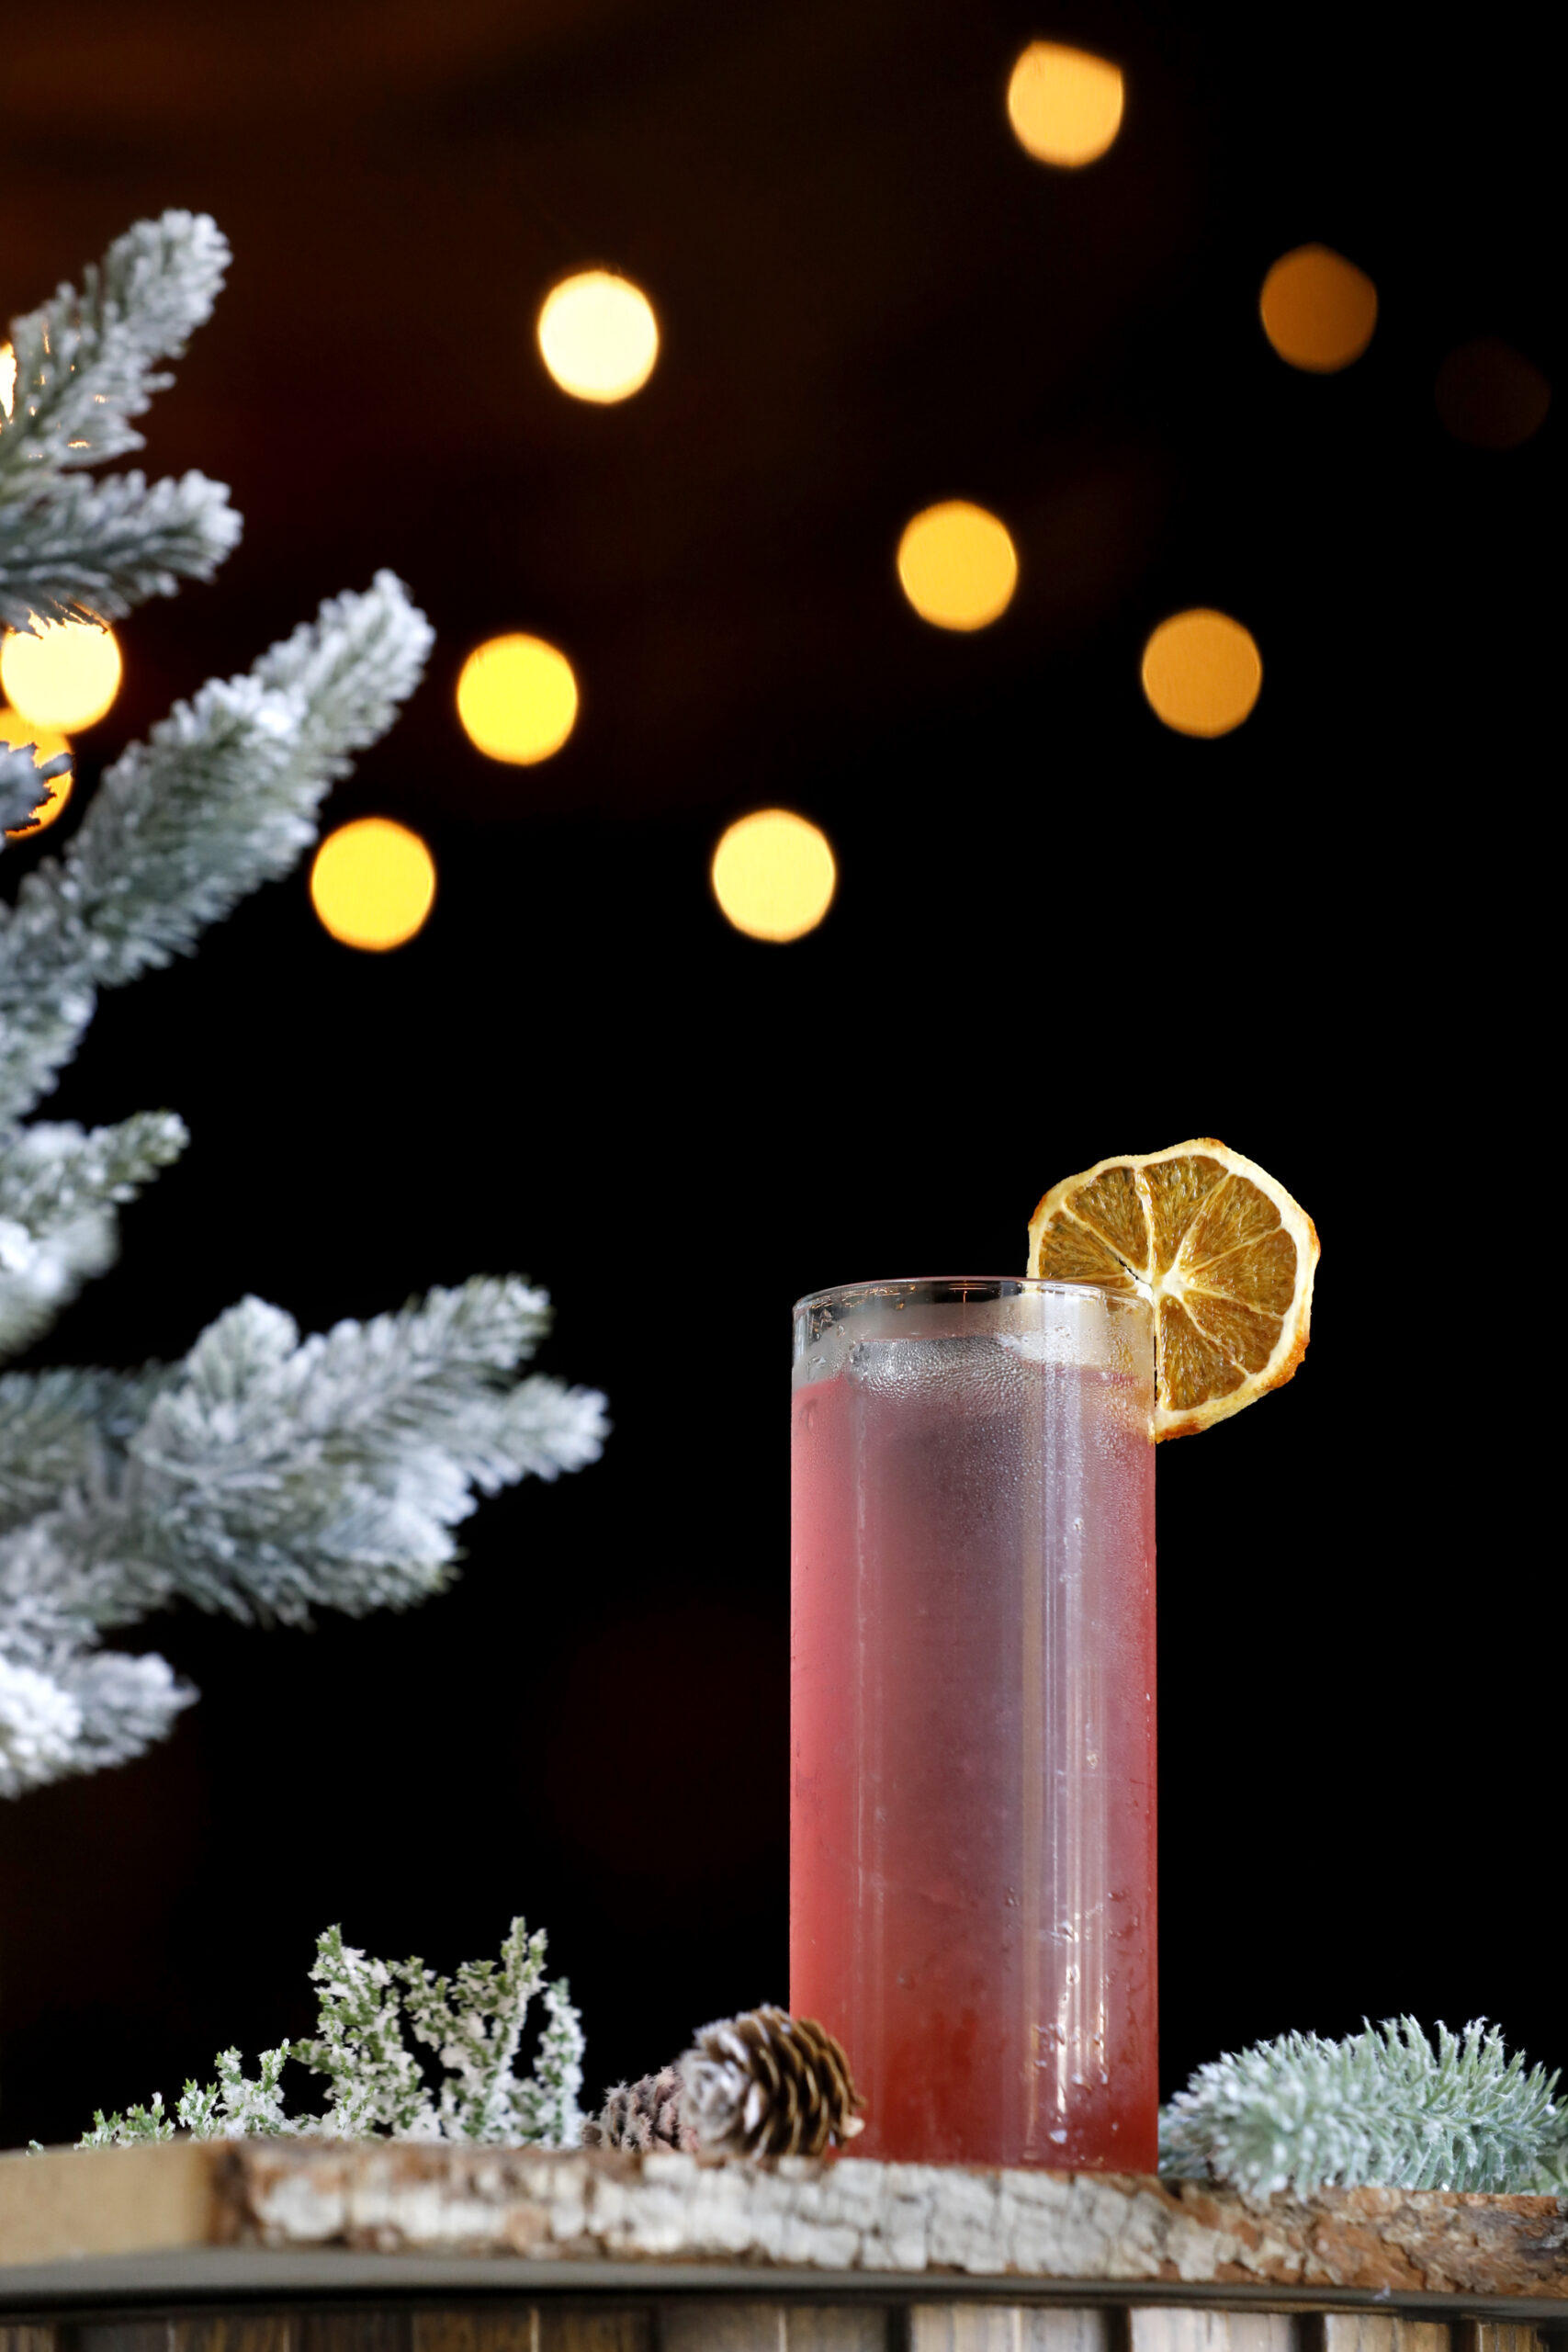 The Gin Cranberry Clove cocktail, is a mixture of Griffo Scott Street Gin, Cranberry Som Shrub, FloraLuna Cardamon Clove Syrup, INNA Mission Fig Shrub, and Fever Tree Club Soda, at the Griffo Distillery and Tasting Bar in Petaluma, Calif., on Thursday, December 2, 2021.(Beth Schlanker/The Press Democrat)